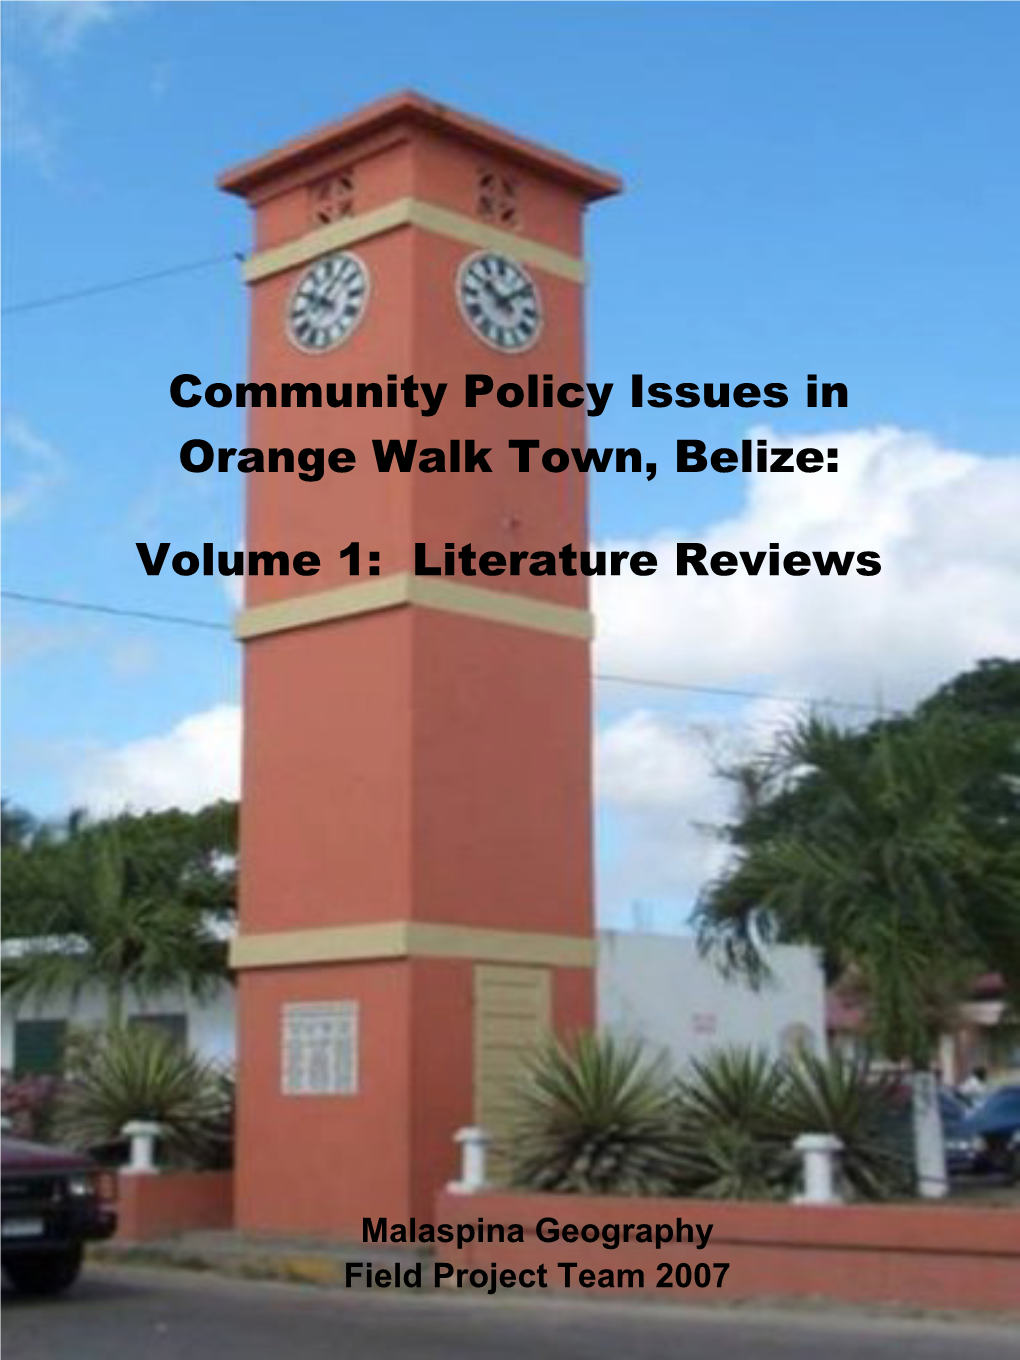 Community Policy Issues in Orange Walk Town, Belize